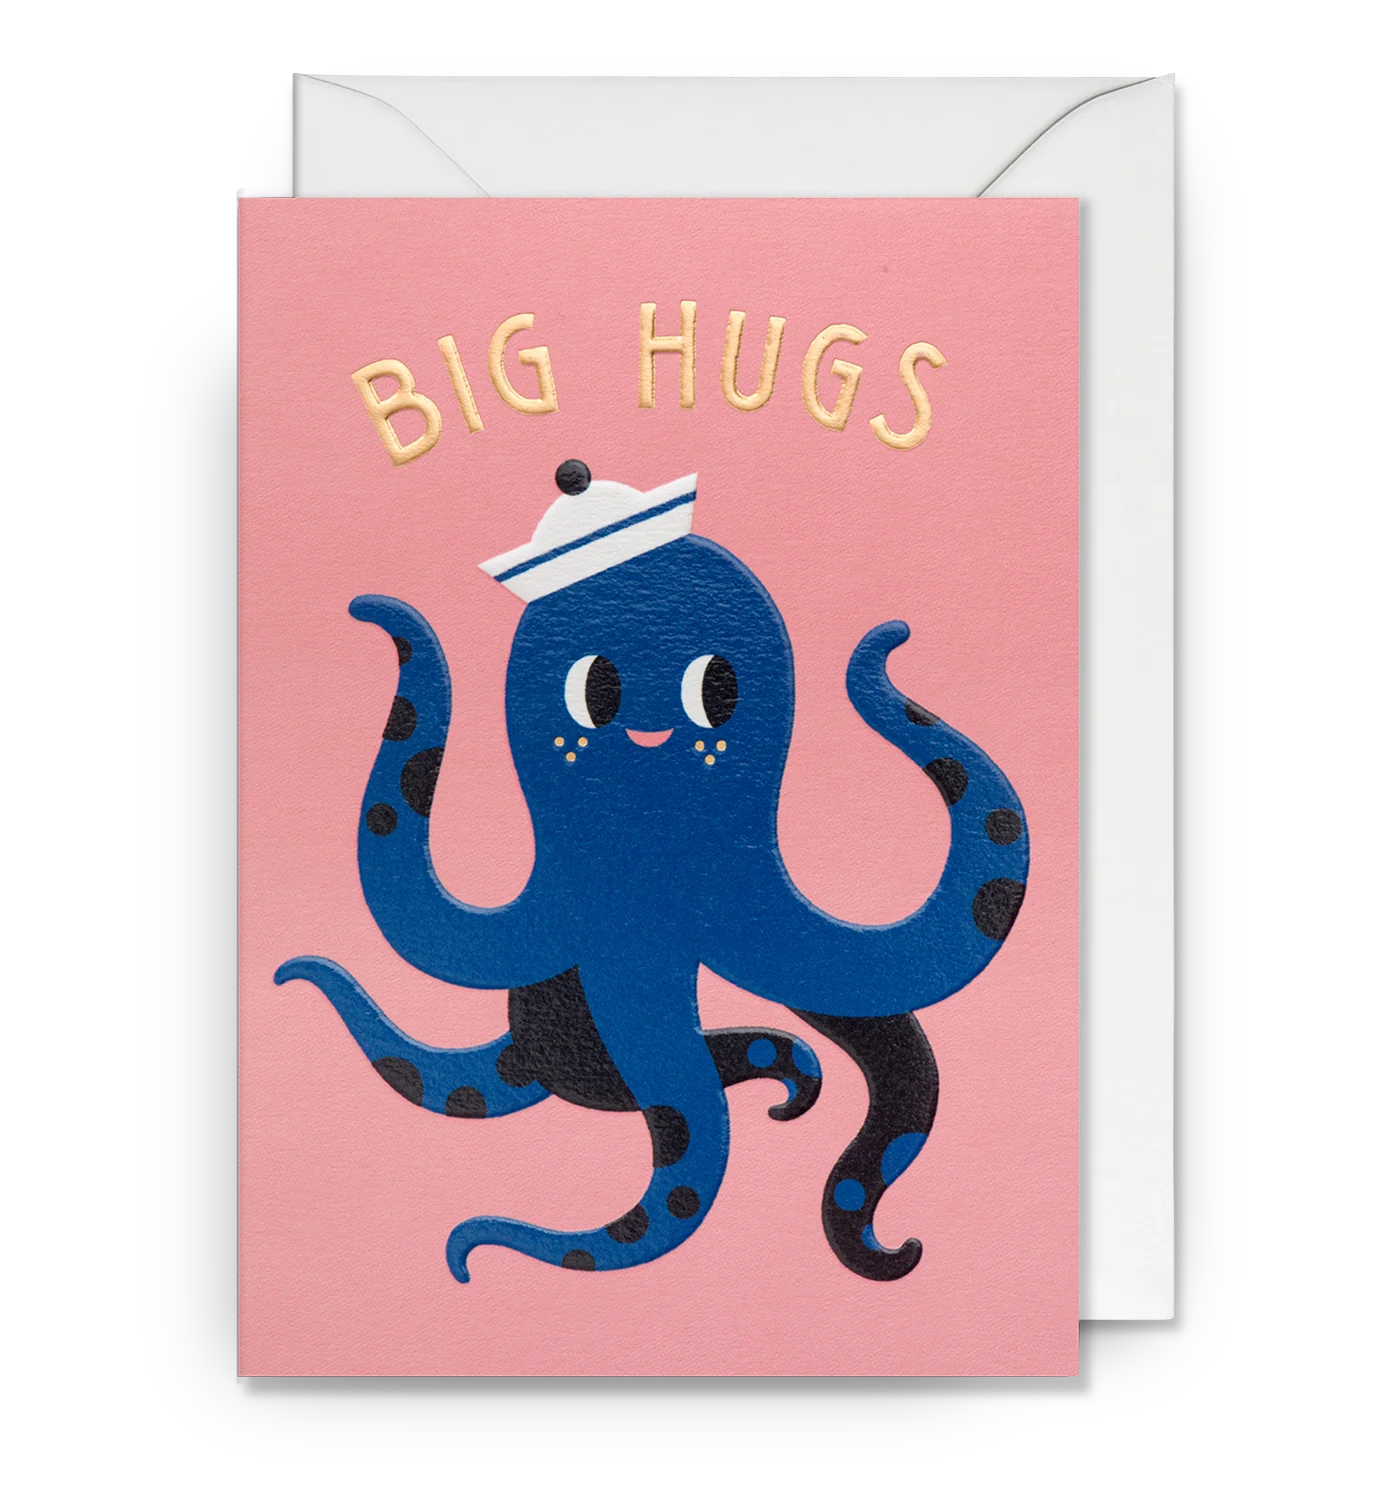 Big Hugs from Smiley Octopus Love Card by Ilse Weisfelt